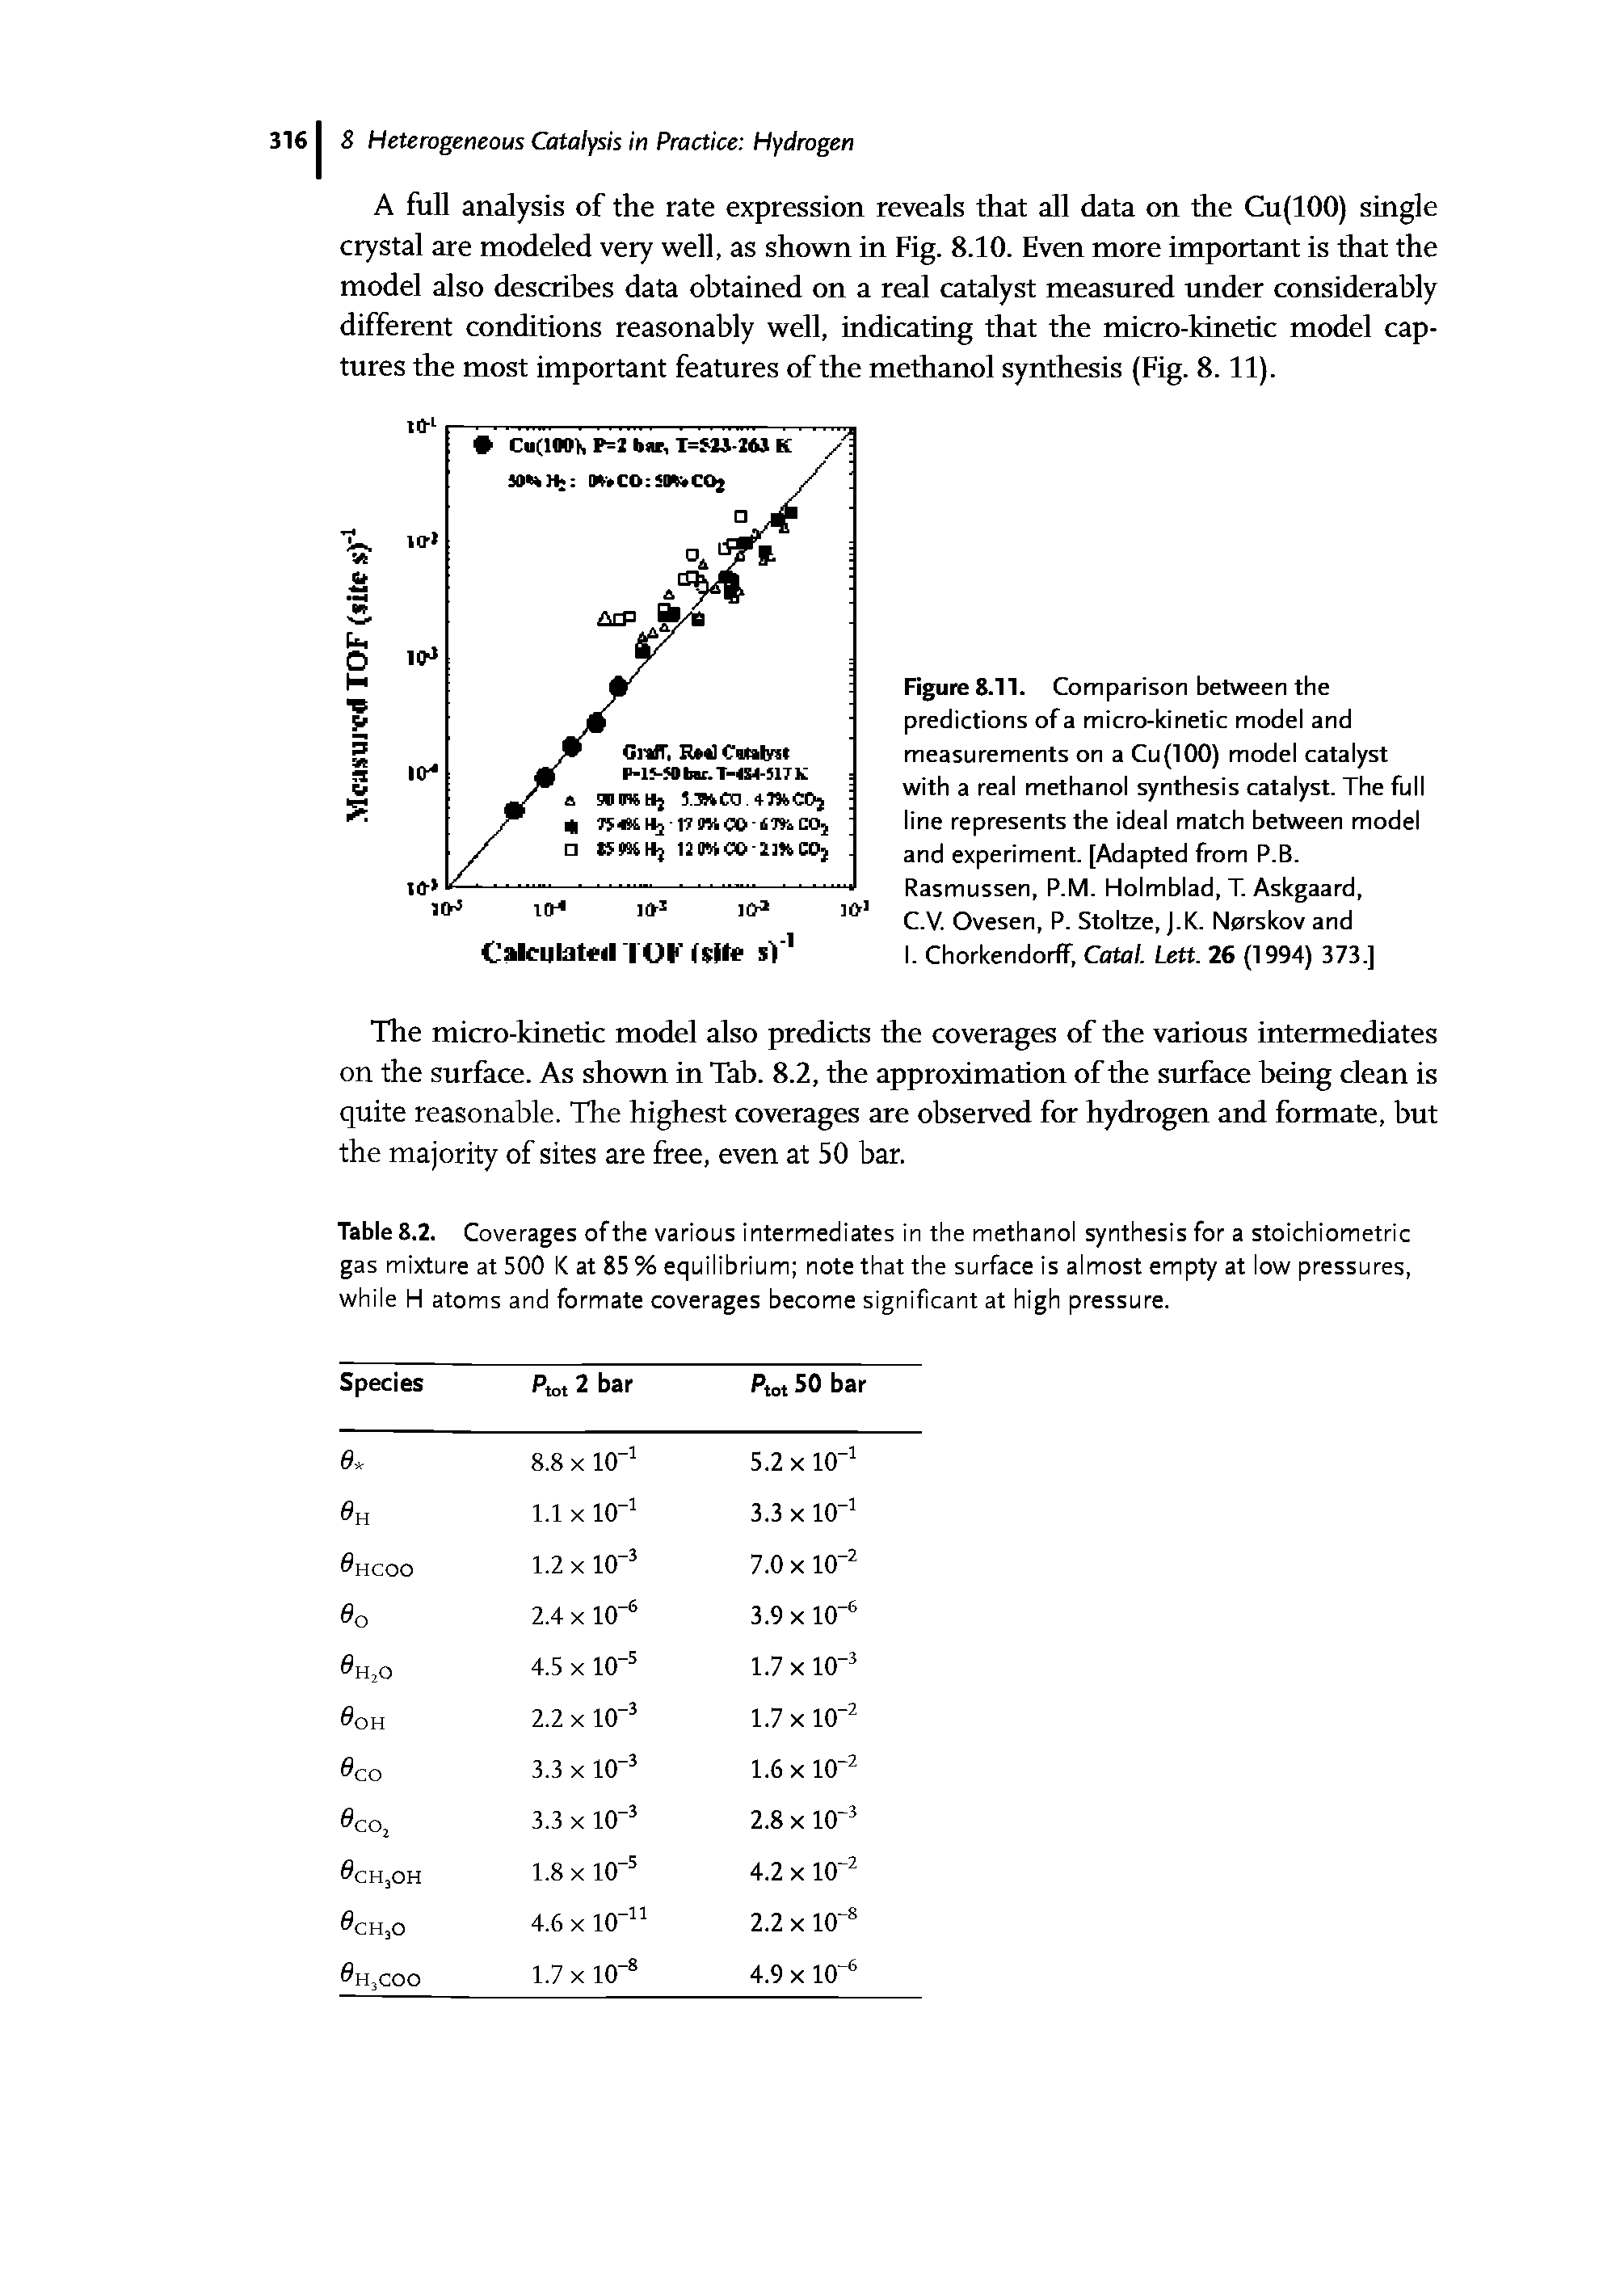 Table 8.2. Coverages of the various intermediates in the methanol synthesis for a stoichiometric gas mixture at 500 K at 85 % equilibrium note that the surface is almost empty at low pressures, while H atoms and formate coverages become significant at high pressure.